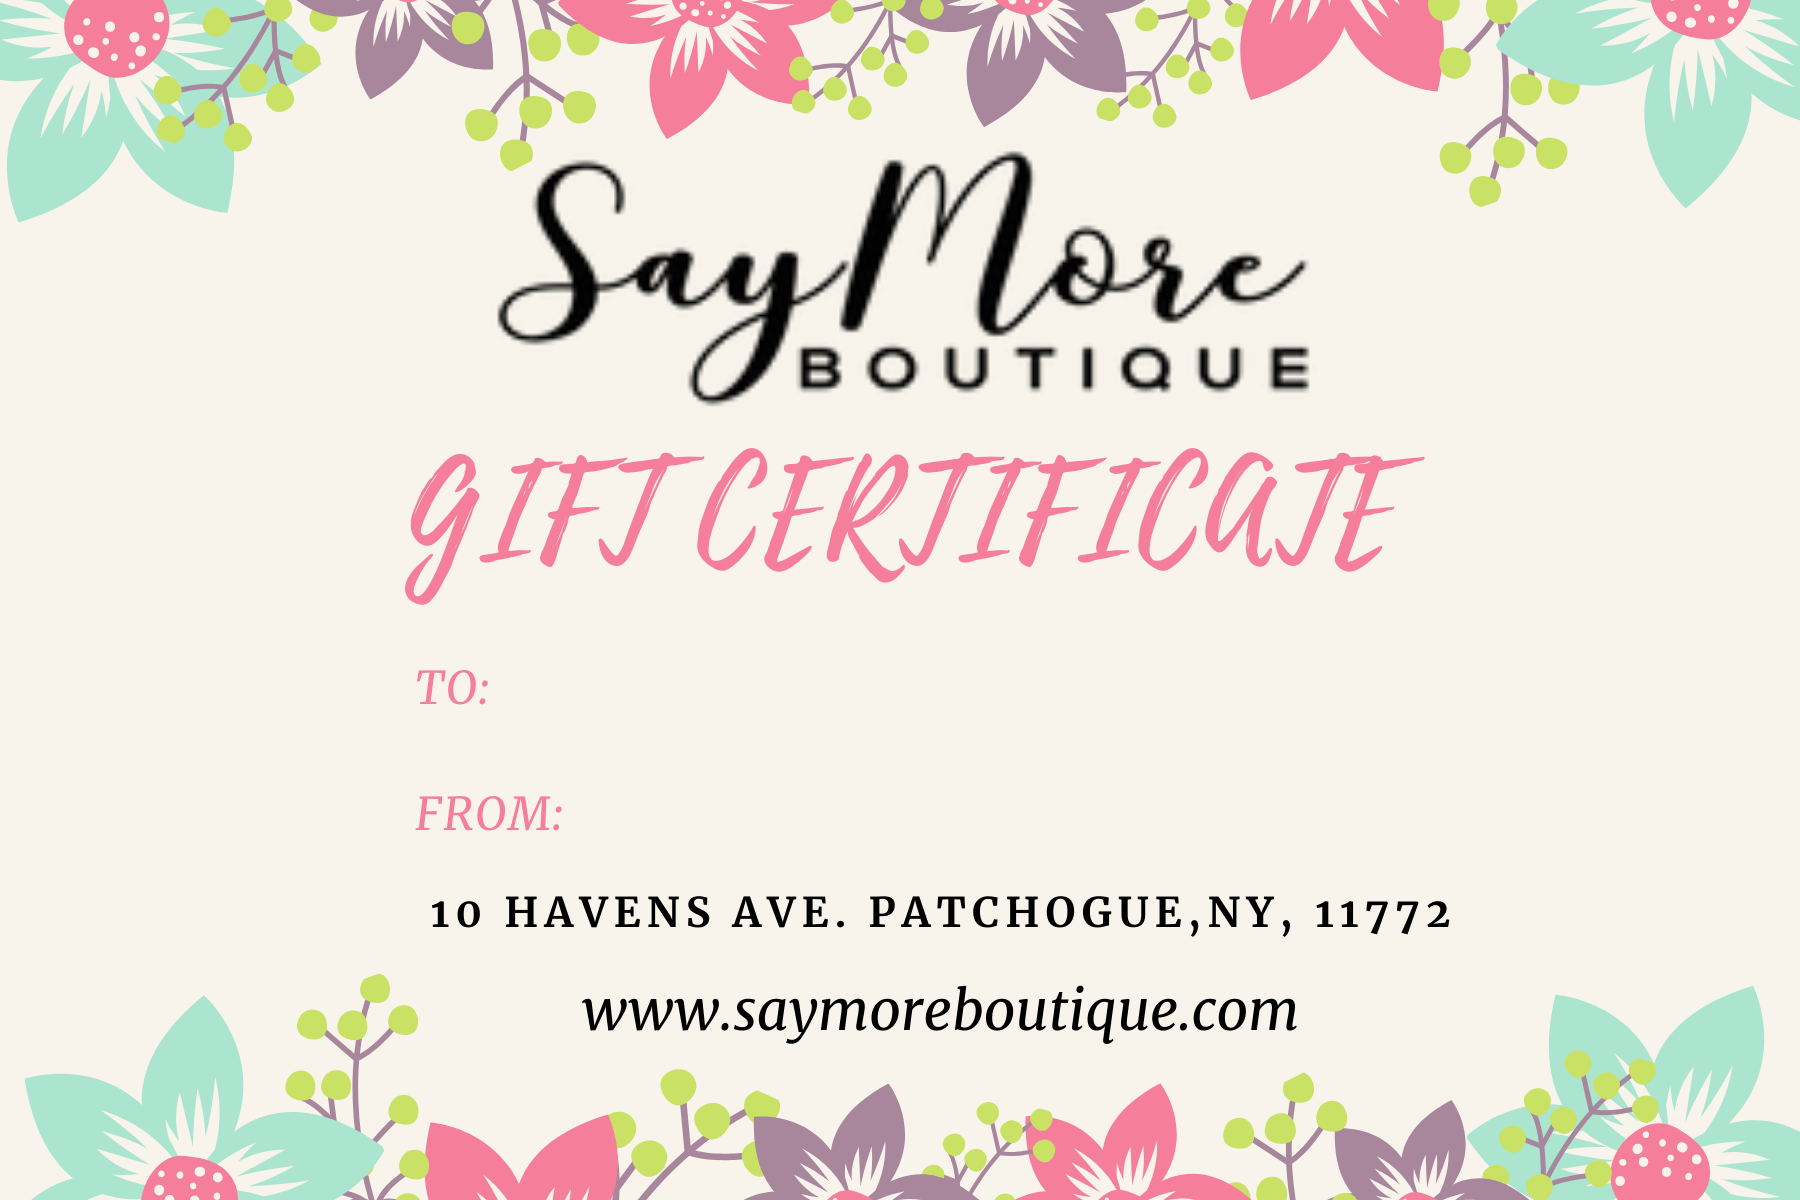 Gift Card, Gift Cards, Say More Boutique, www.SayMoreBoutique.com